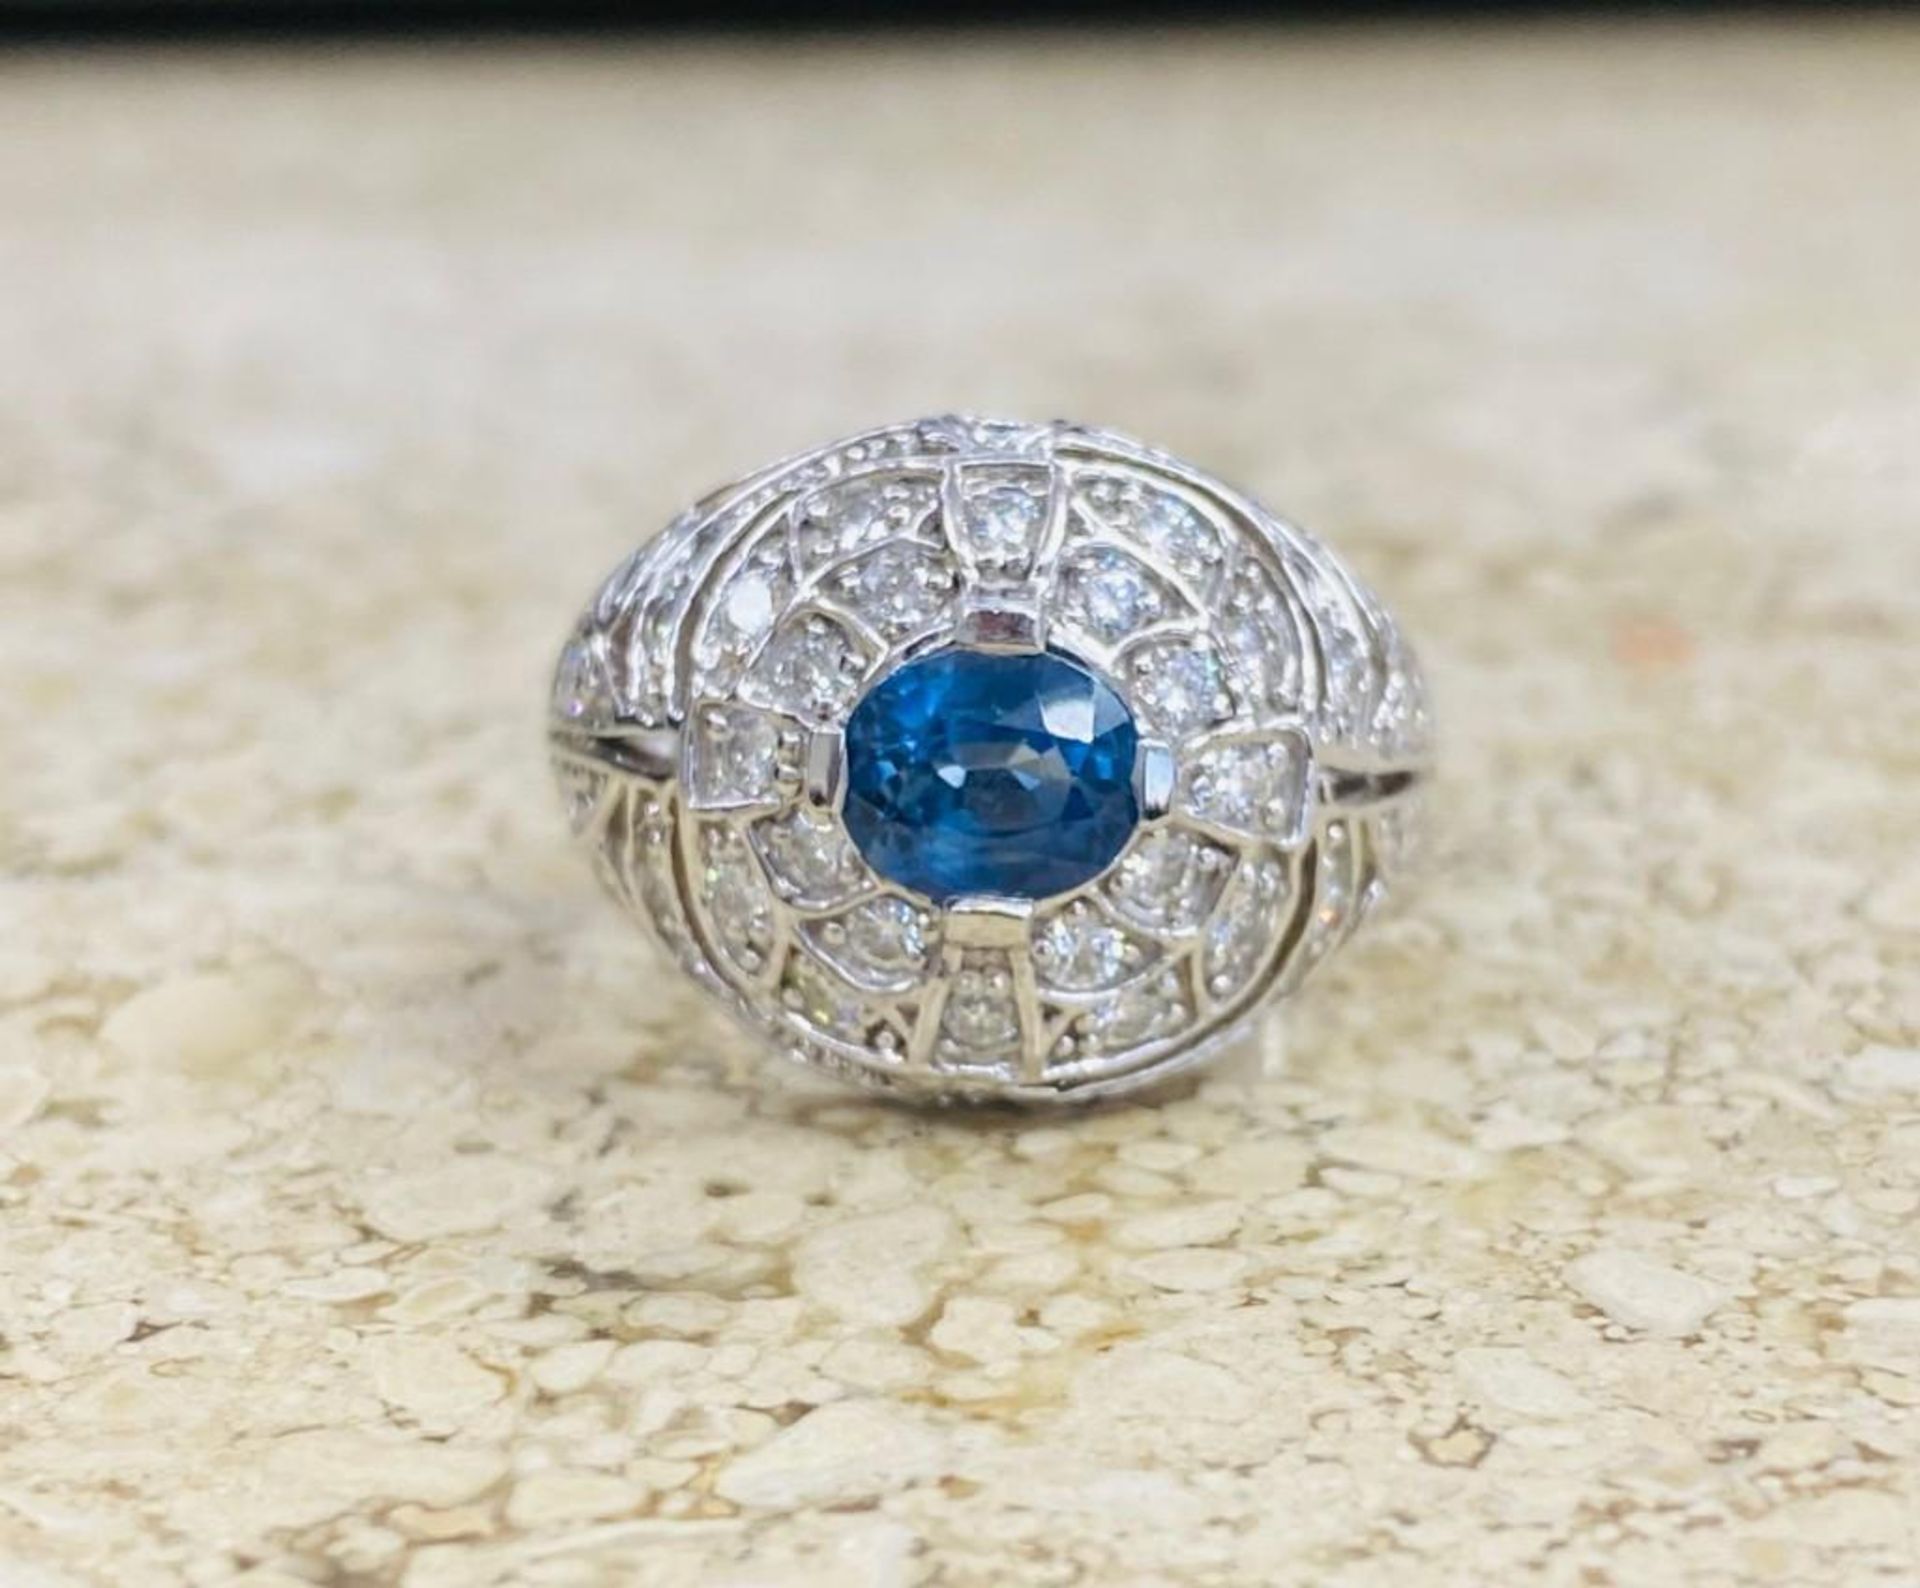 ESTATE SAPPHIRE AND DIAMOND RING. APPROXIMATELY 1.45CT SAPPHIRE. APPROXIMATELY 1.06CT DIAMONDS. 14KT